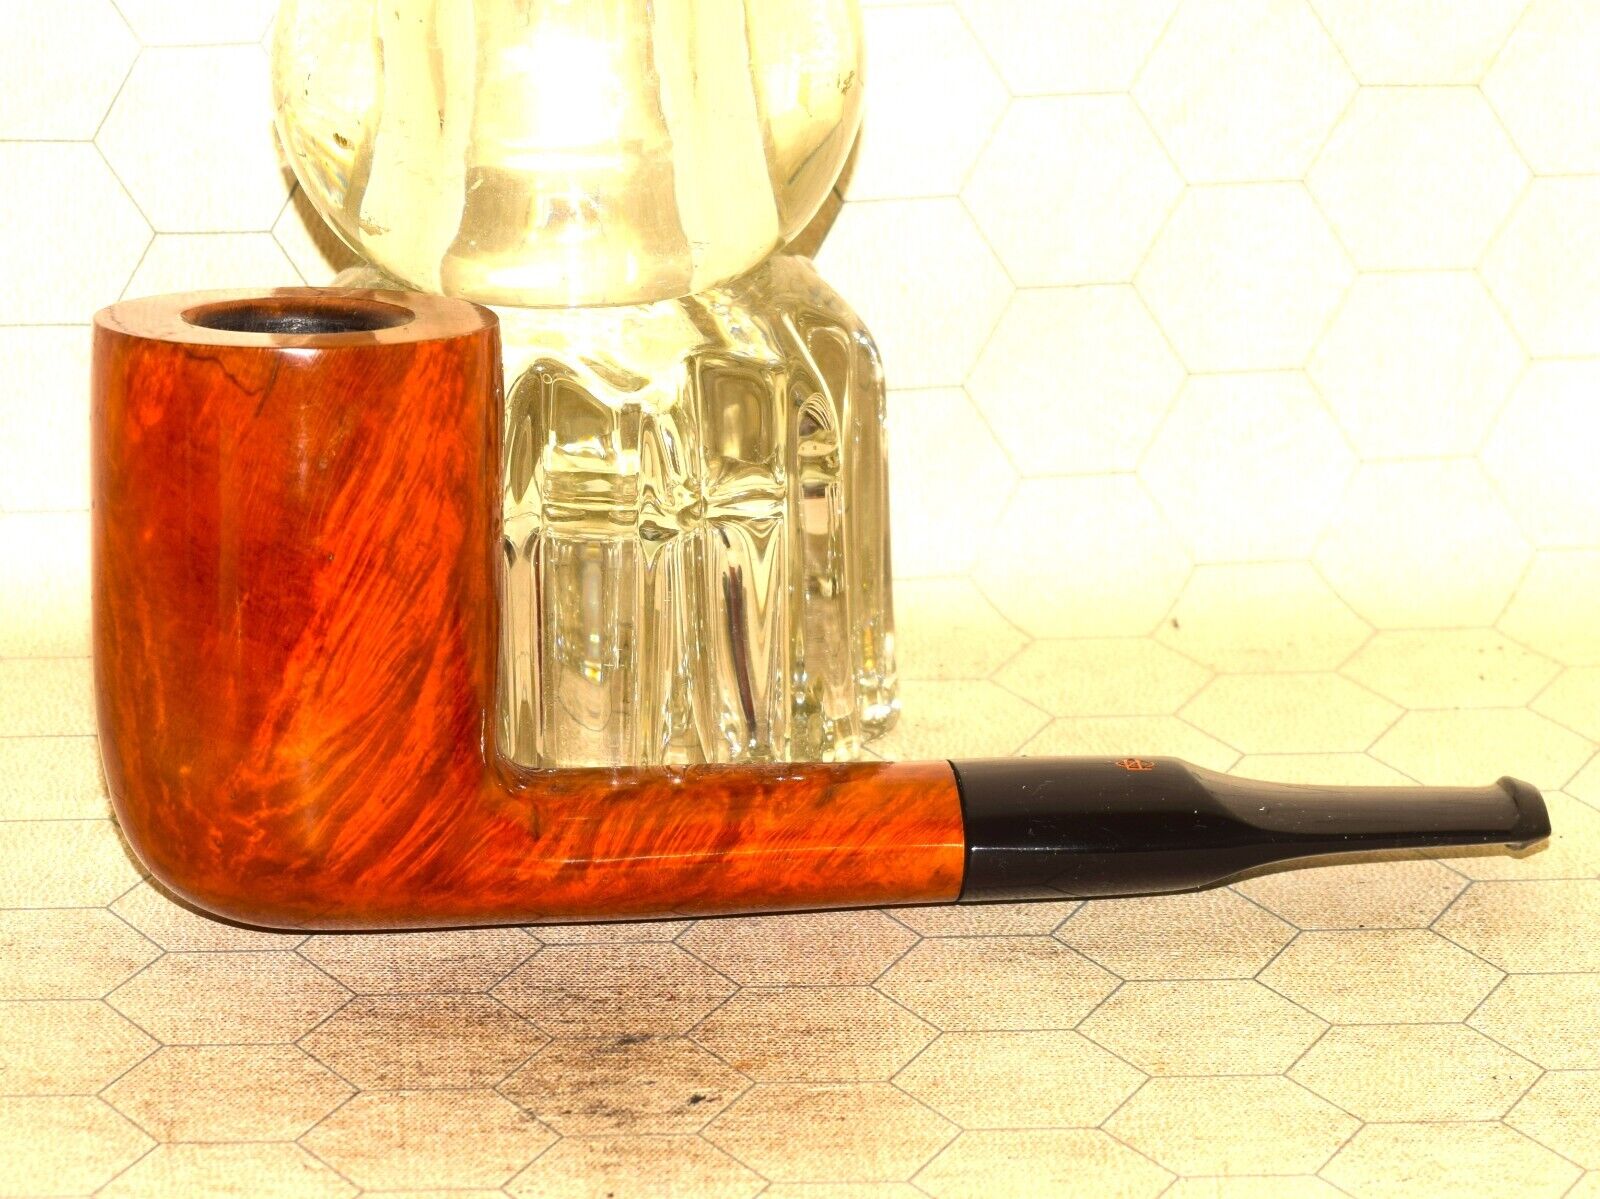 Giant SPITFIRE BY LORENZO TITANO 8683 Italy 9mm Filter Tobacco Pipe #A958